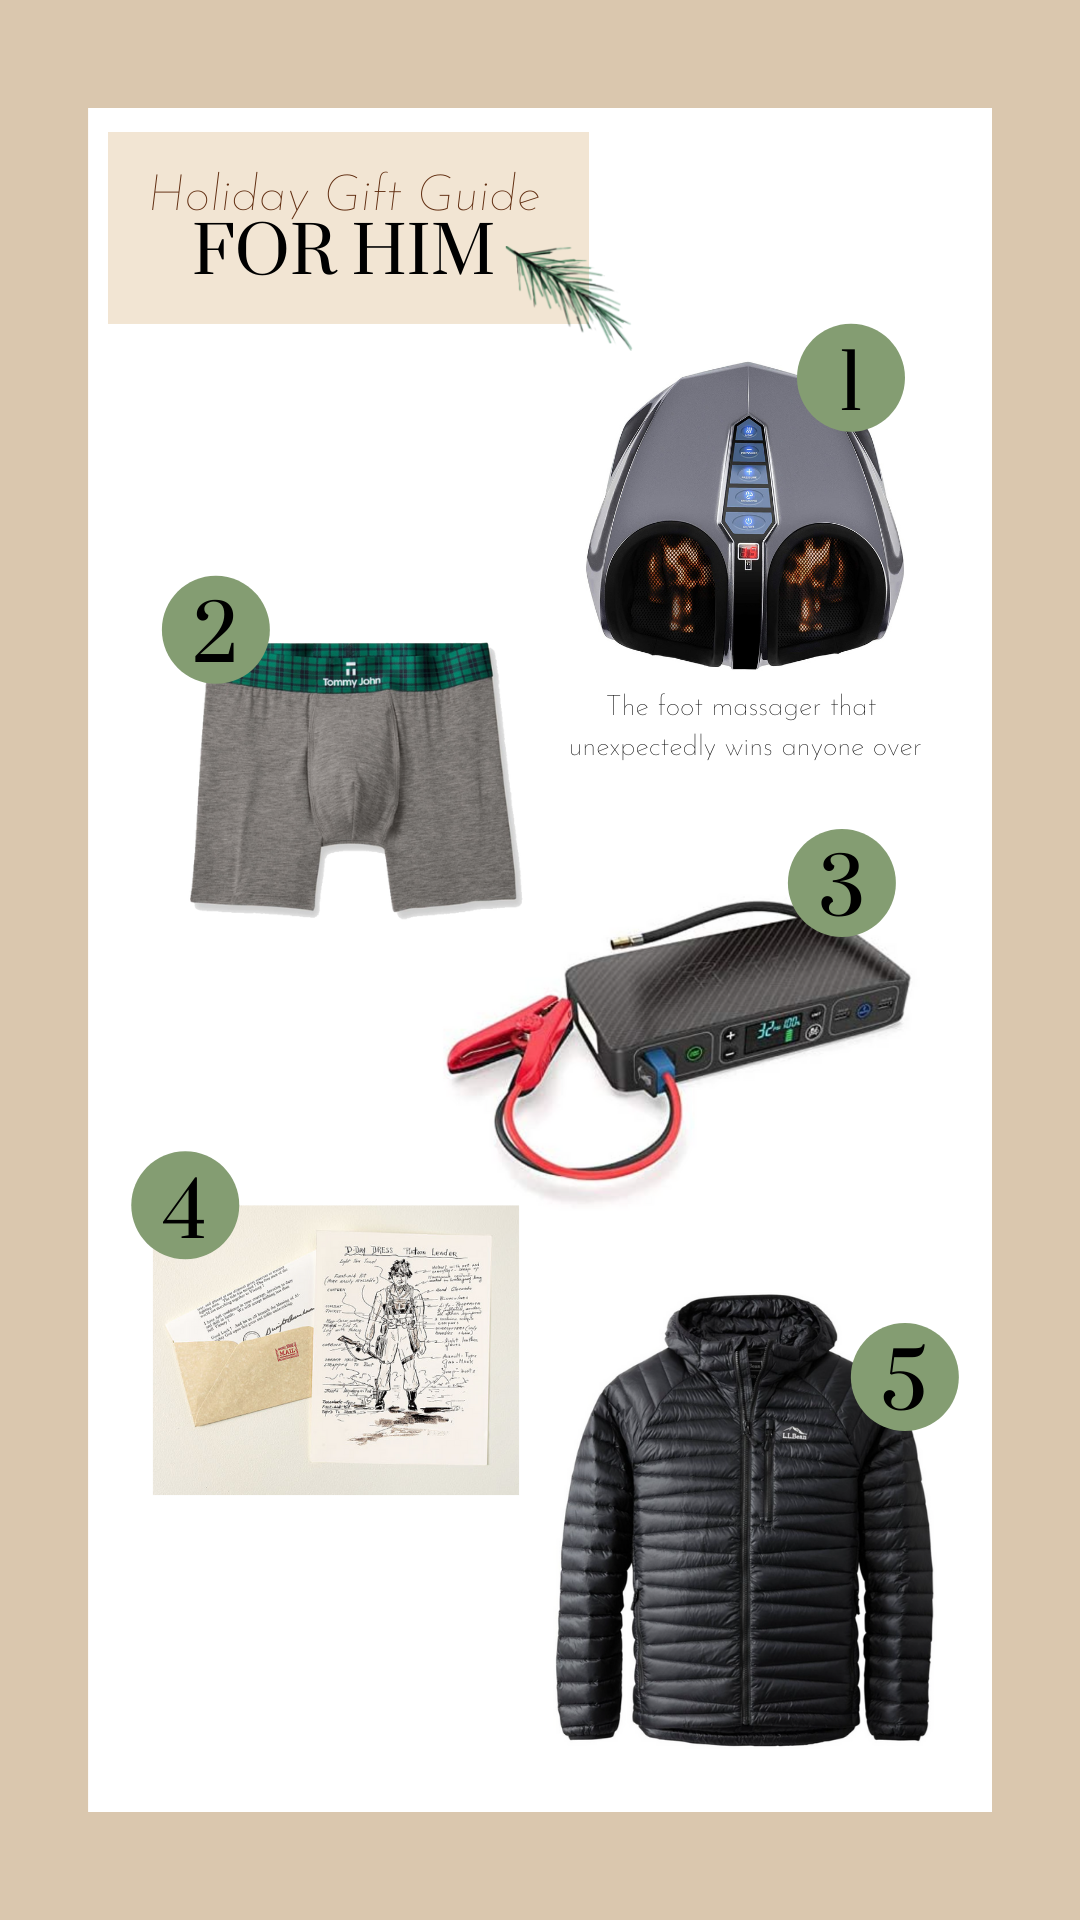 HOLIDAY GIFT GUIDE 2021: Gifts For Men